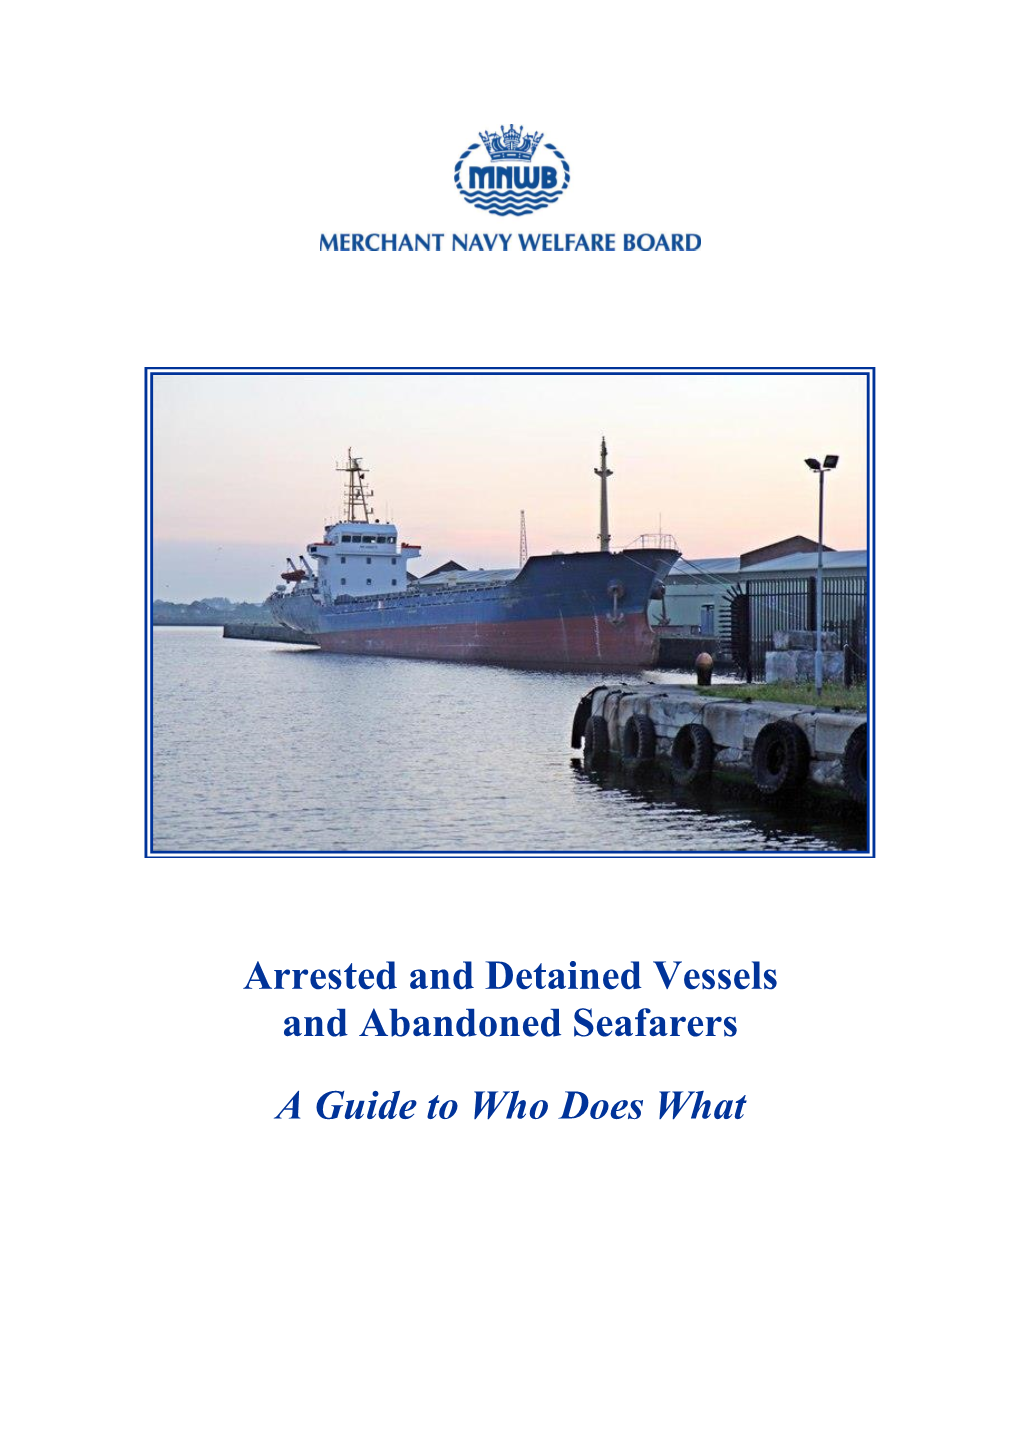 Arrested and Detained Vessels and Abandoned Seafarers a Guide to Who Does What